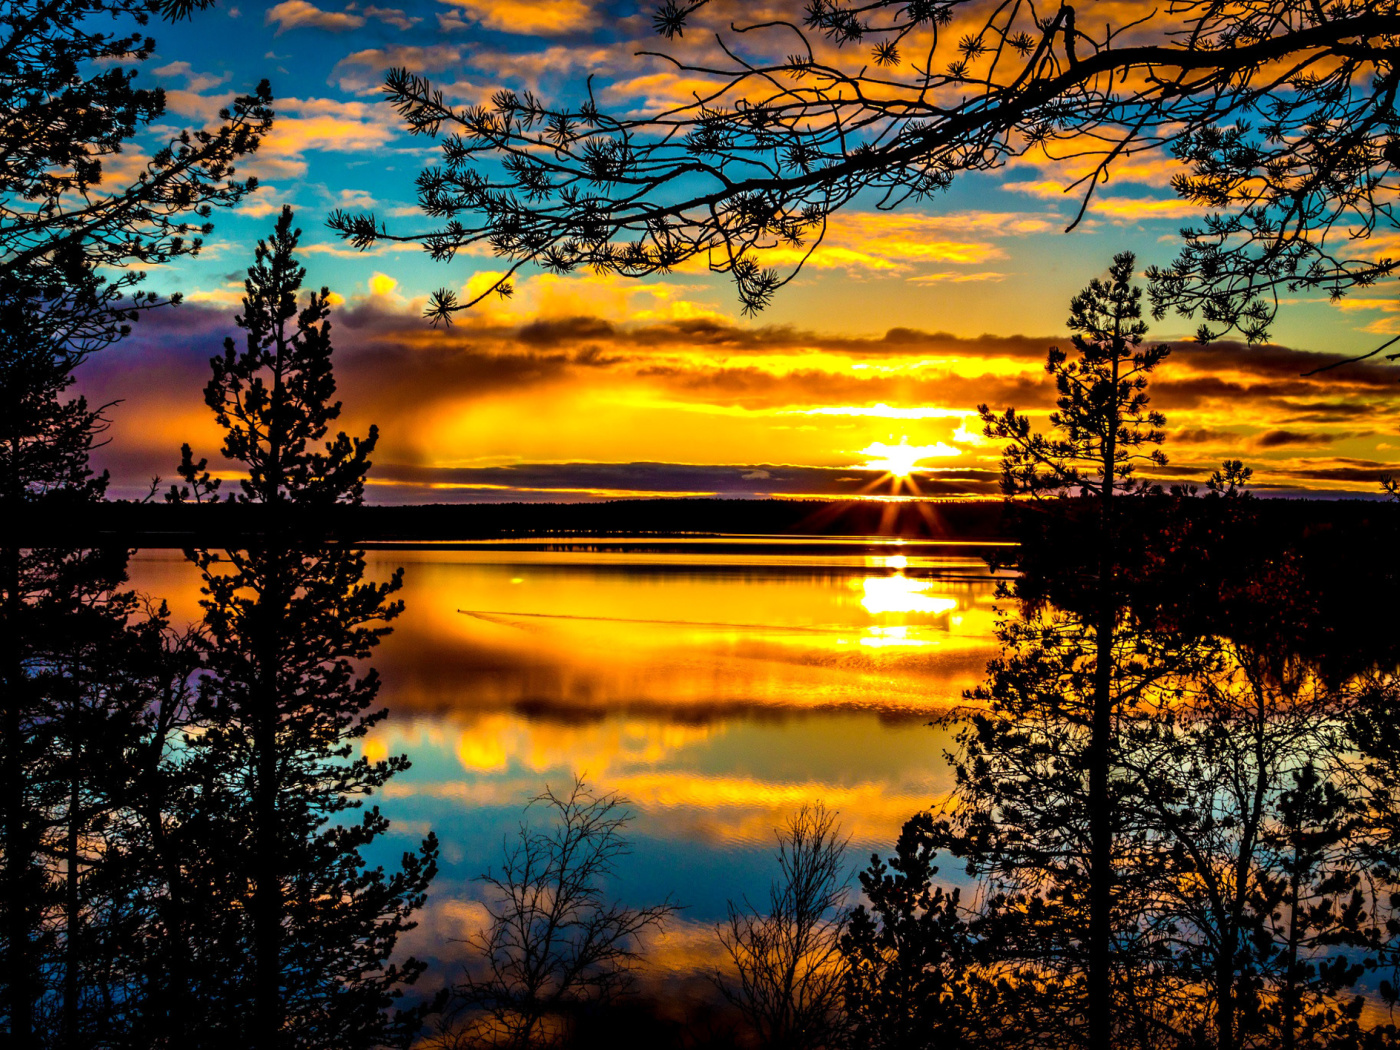 Sunrise and Sunset HDR wallpaper 1400x1050